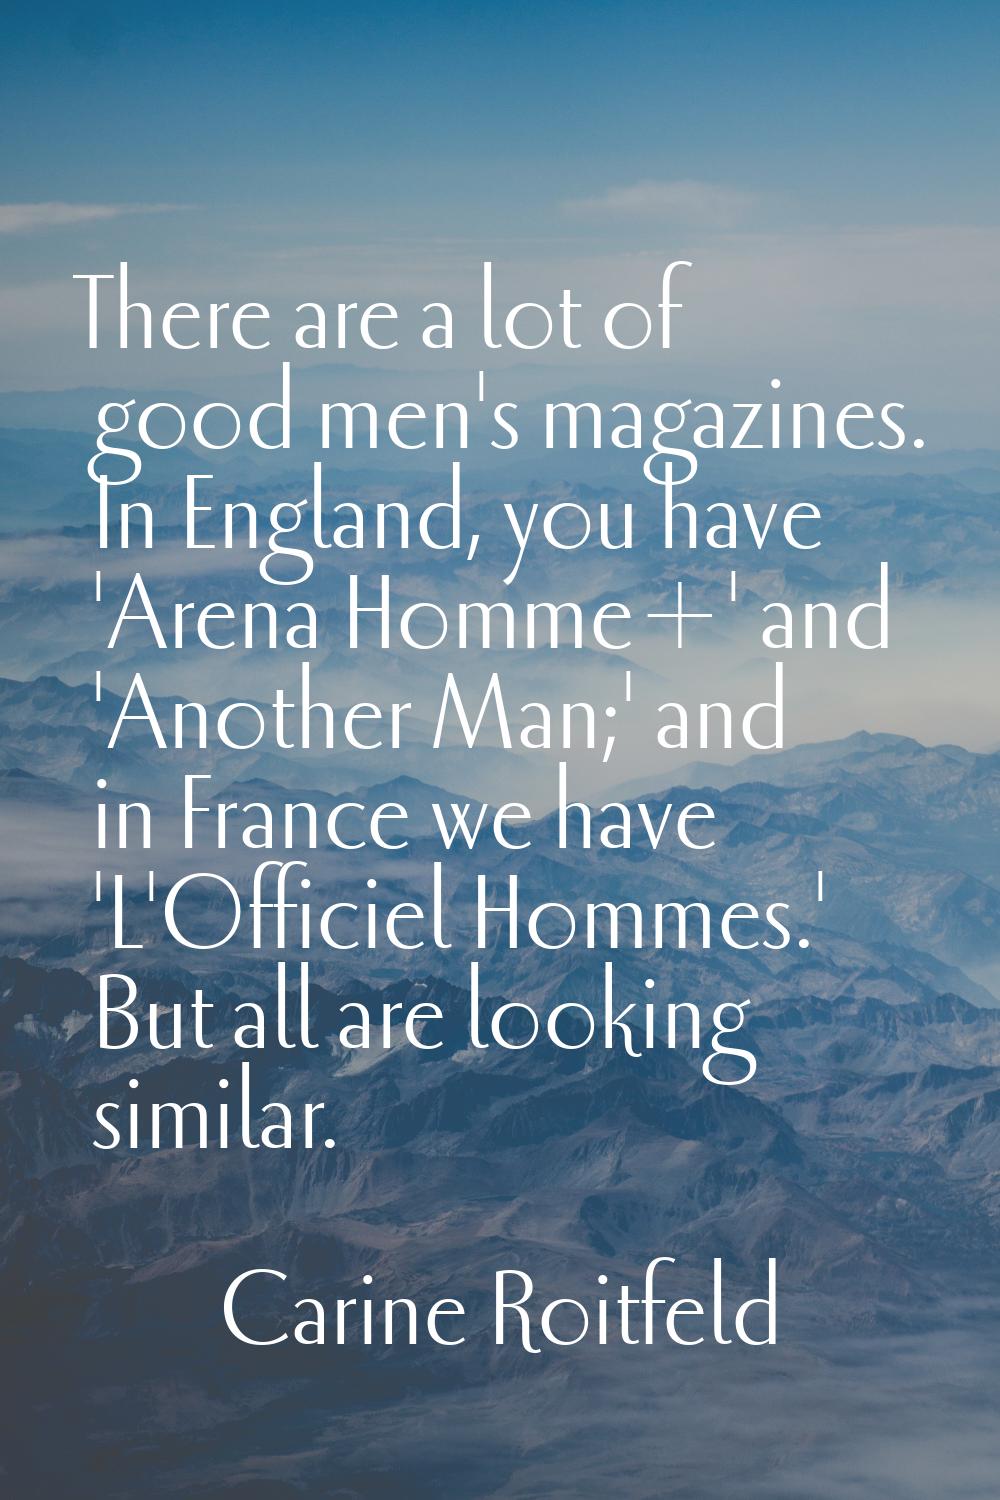 There are a lot of good men's magazines. In England, you have 'Arena Homme+' and 'Another Man;' and